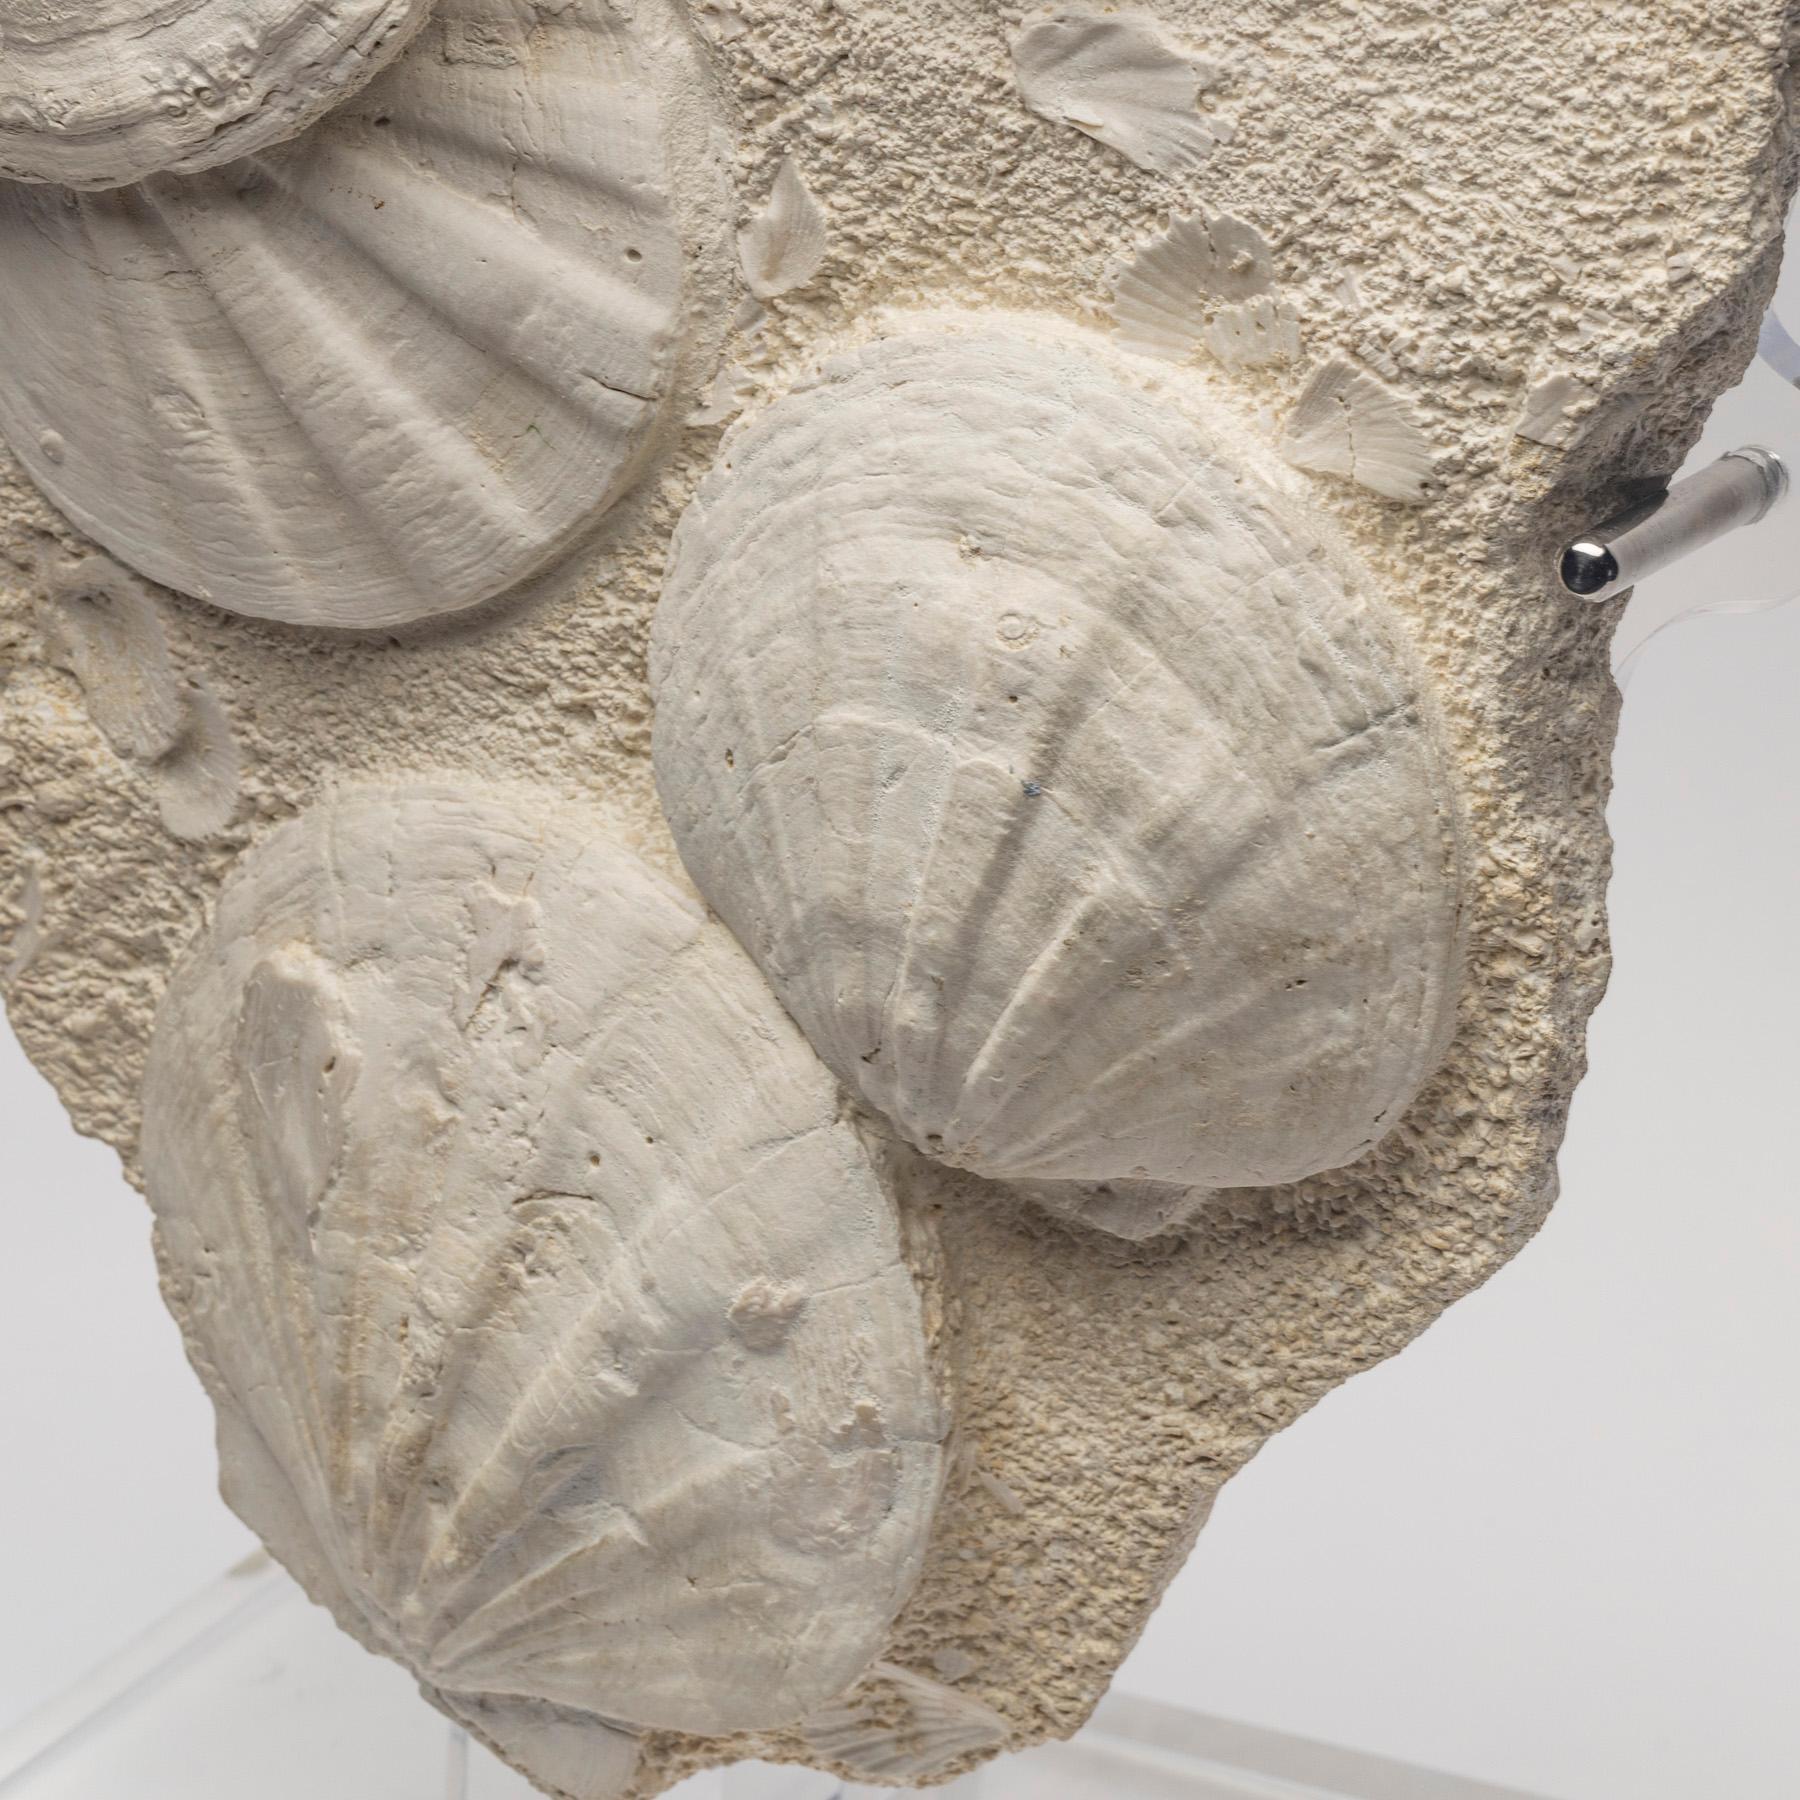 Contemporary Fossil Pecten Plate Specimen from France 23 Million Y/O in a Custom Acrylic Base